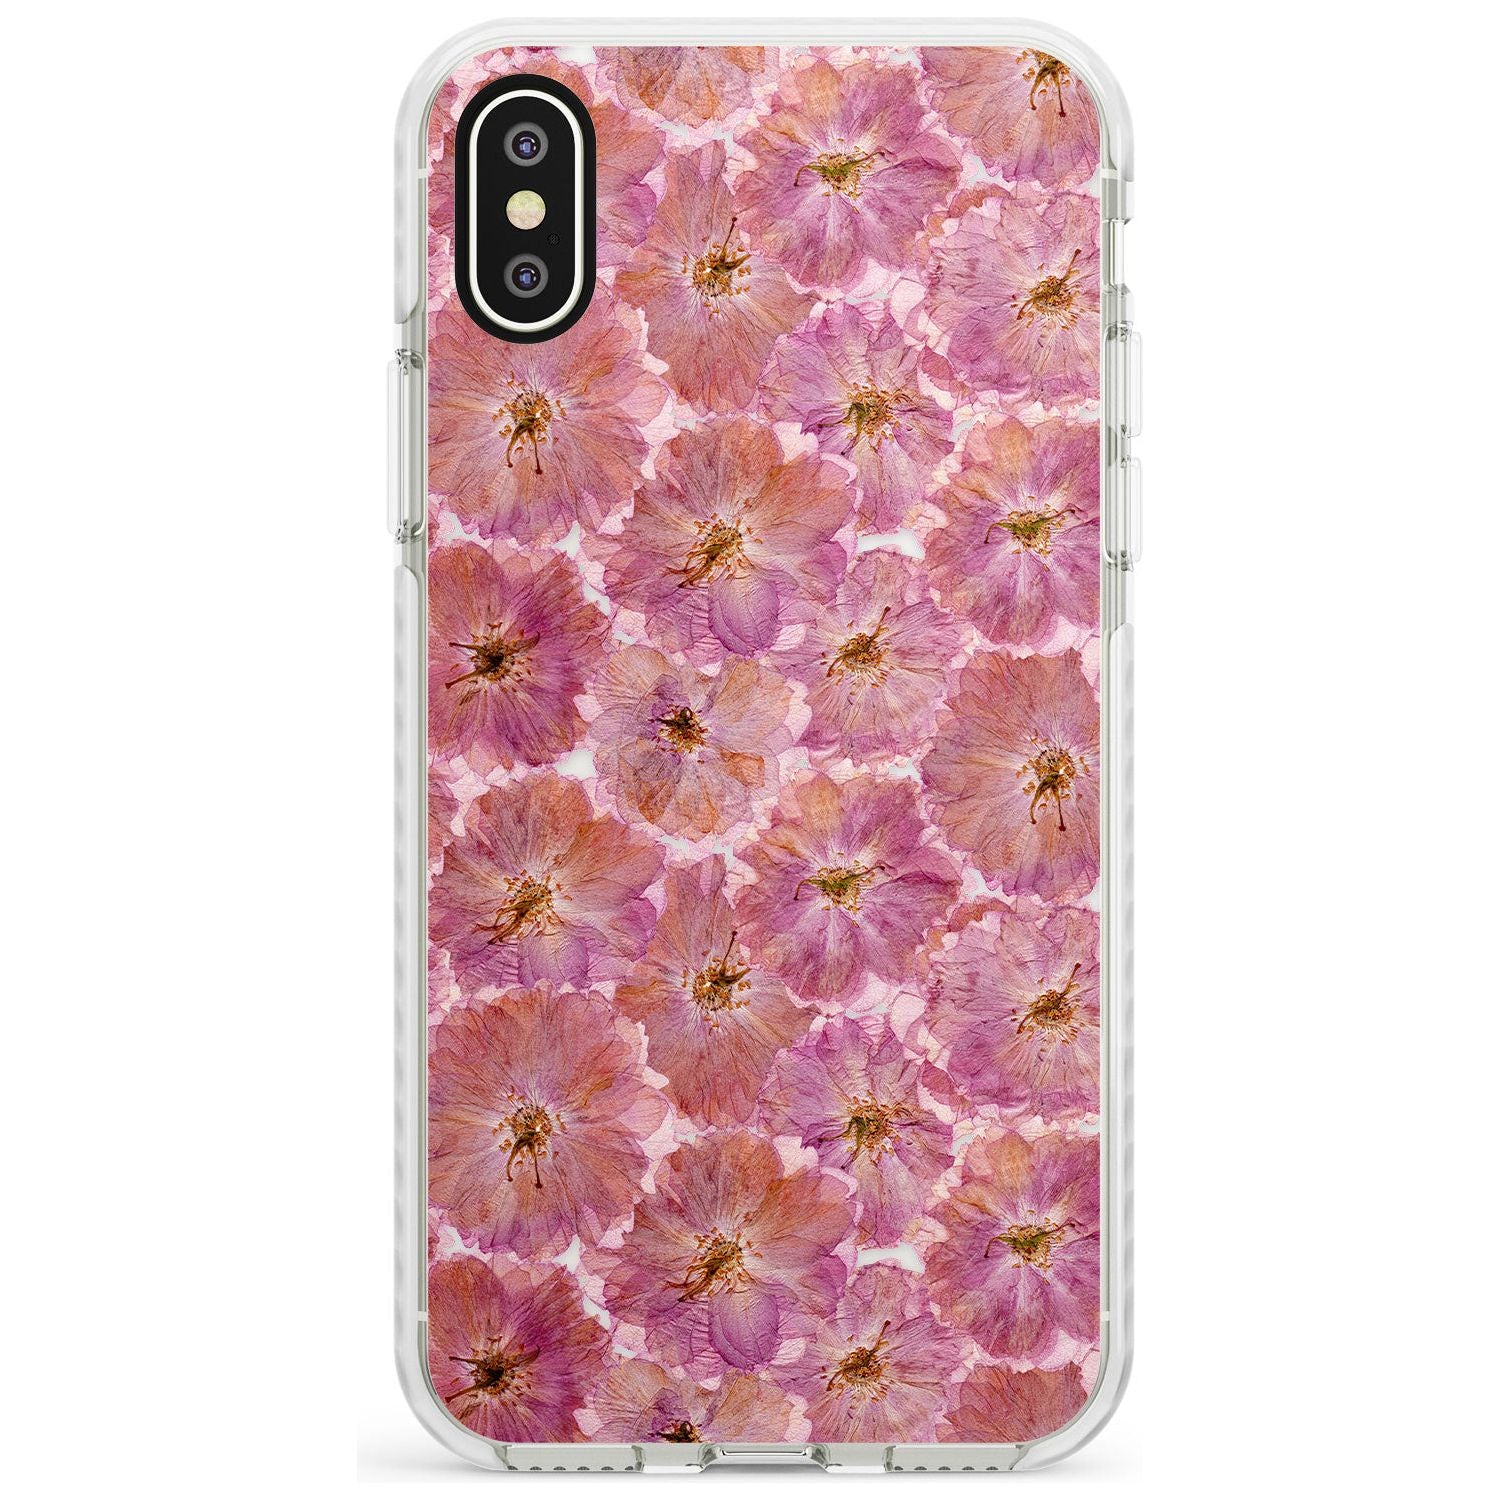 Large Pink Flowers Transparent Design Impact Phone Case for iPhone X XS Max XR